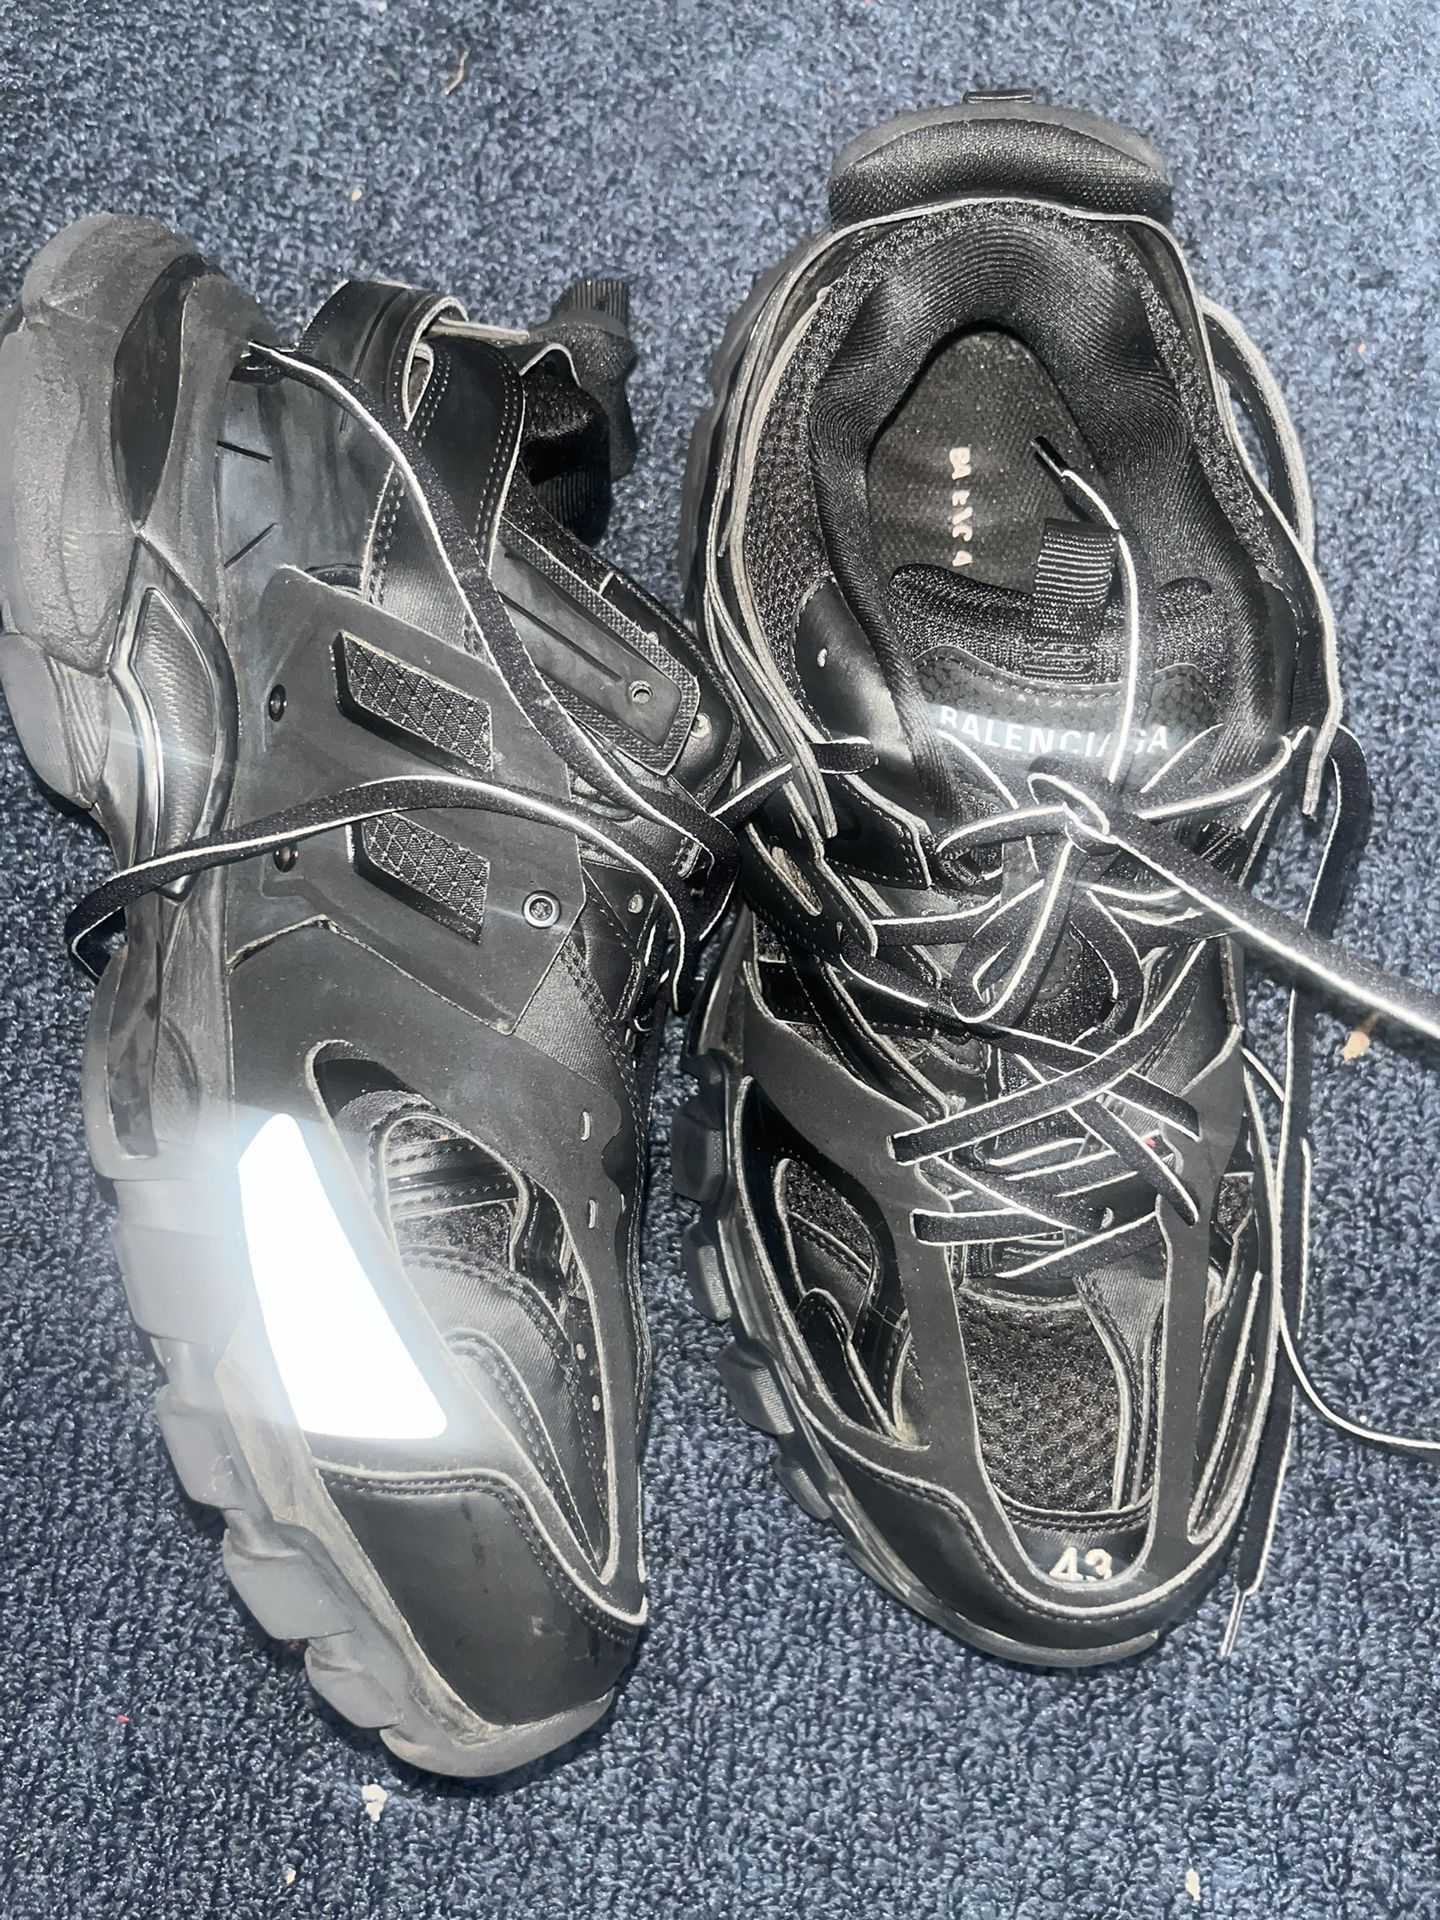 Balenciaga Track Runners 43 for Sale in San Francisco, CA OfferUp